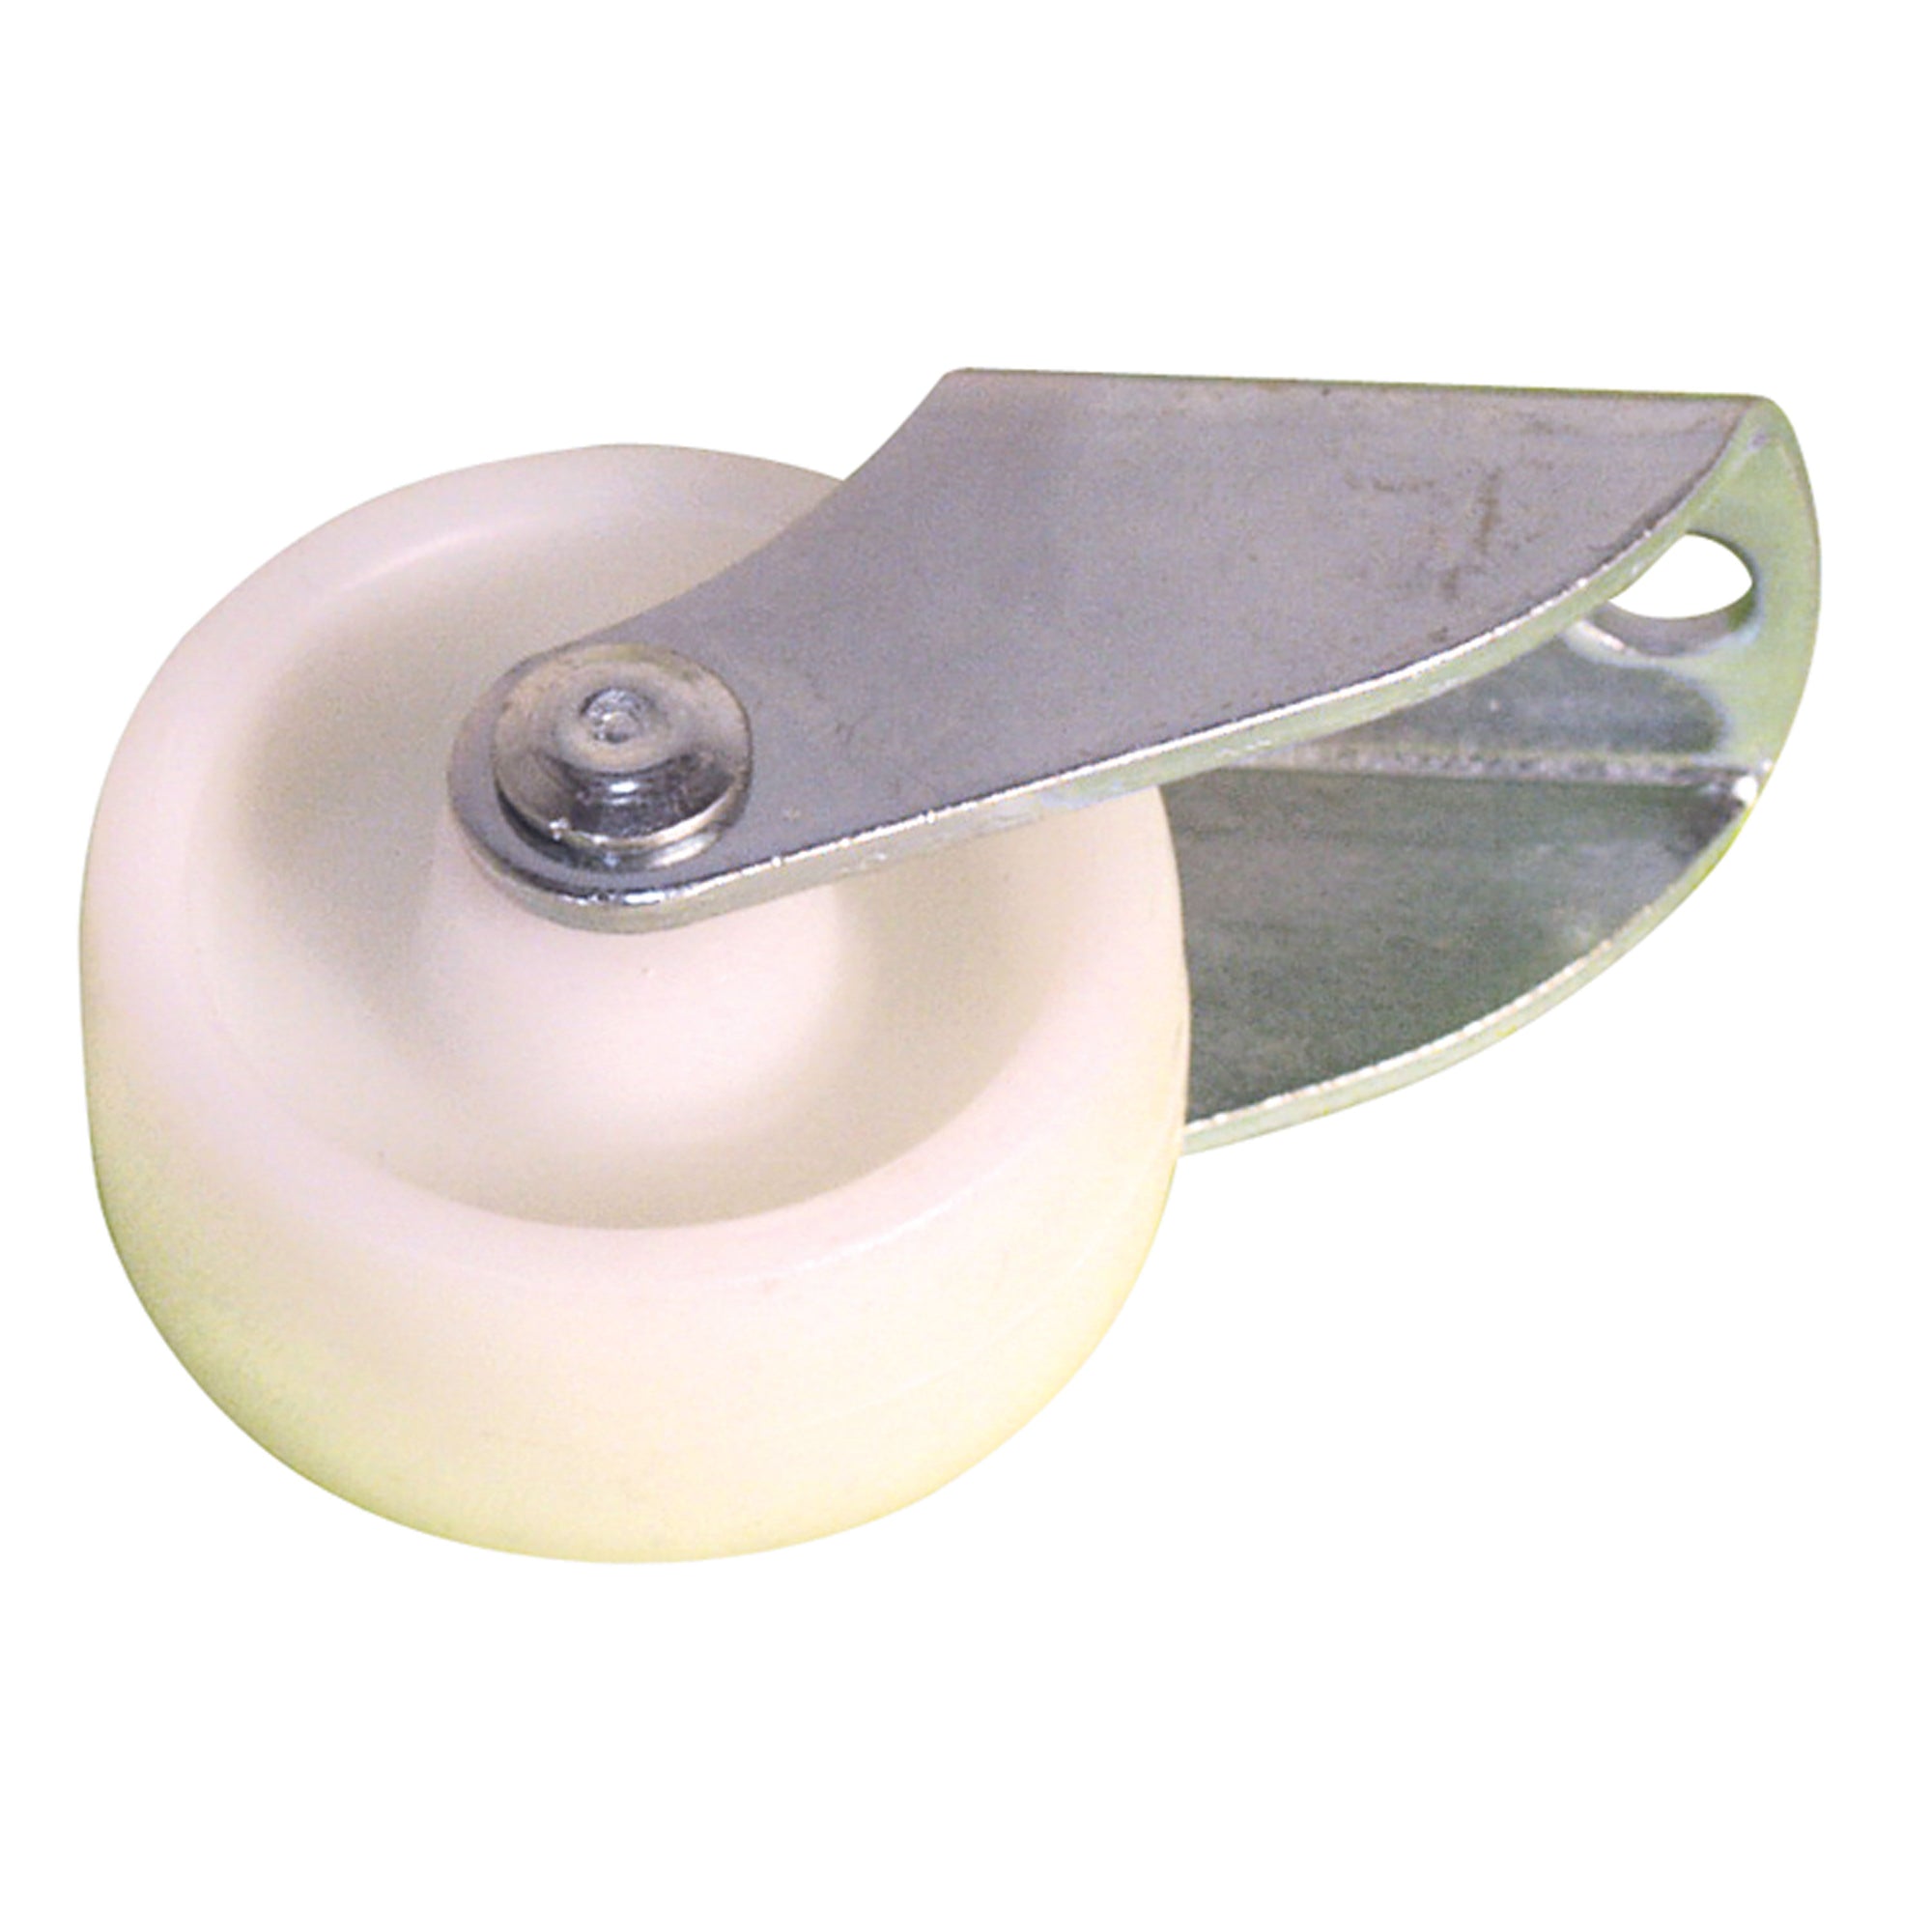 JR Products 05014 Removable Awning Saver